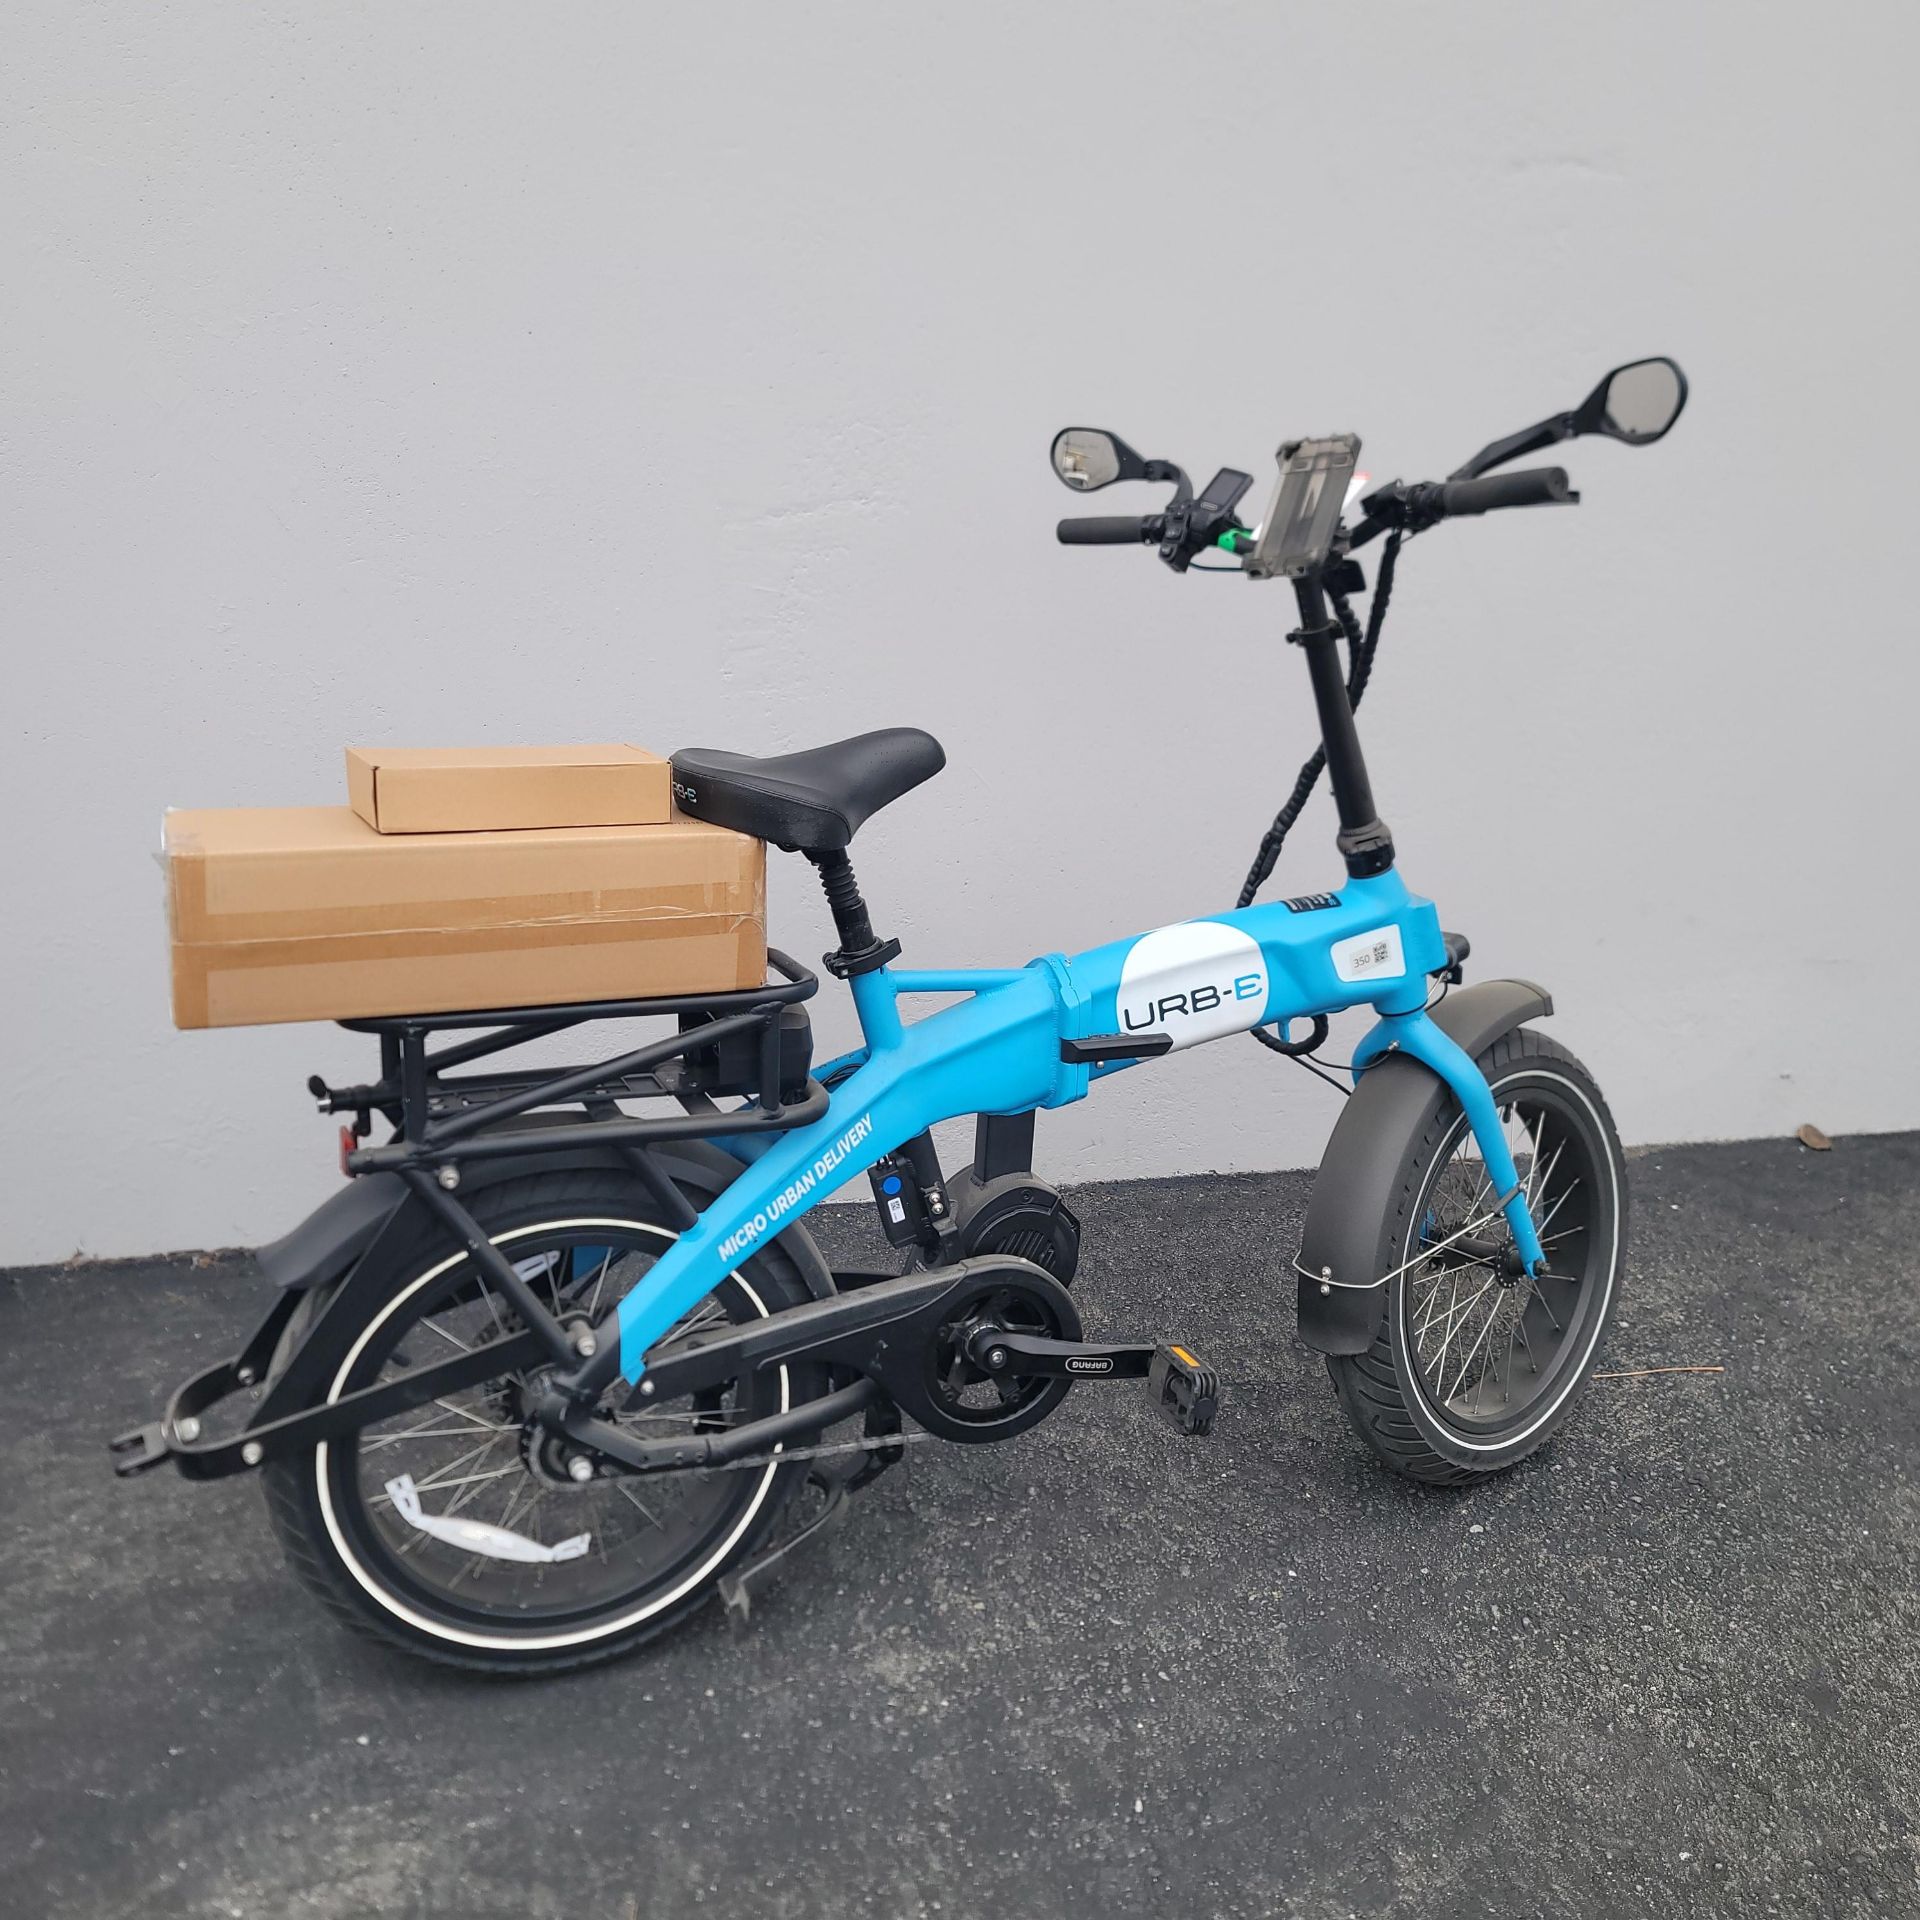 URB-E ELECTRIC DELIVERY BIKE, NEW, 750W MID DRIVE MOTOR, SINGLE SPEED, THUMB THROTTLE WITH PEDAL - Image 2 of 6